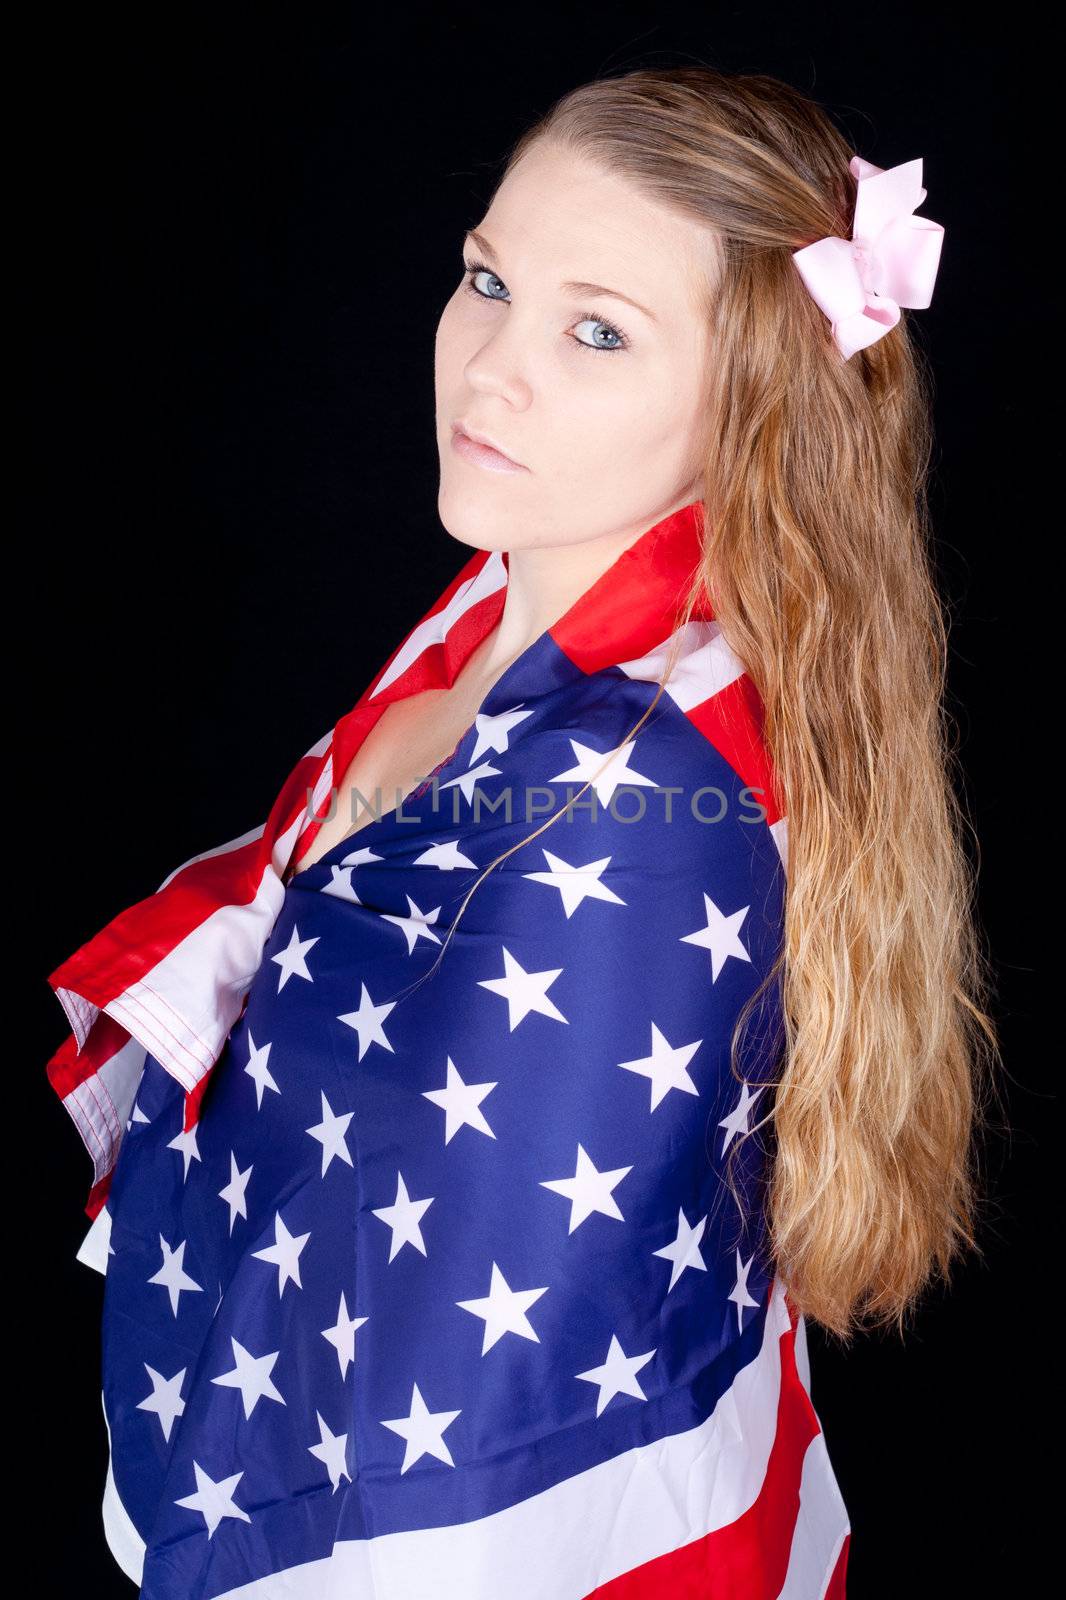 A serious woman with a flag drapped around her.  She does not take her liberty lightly.